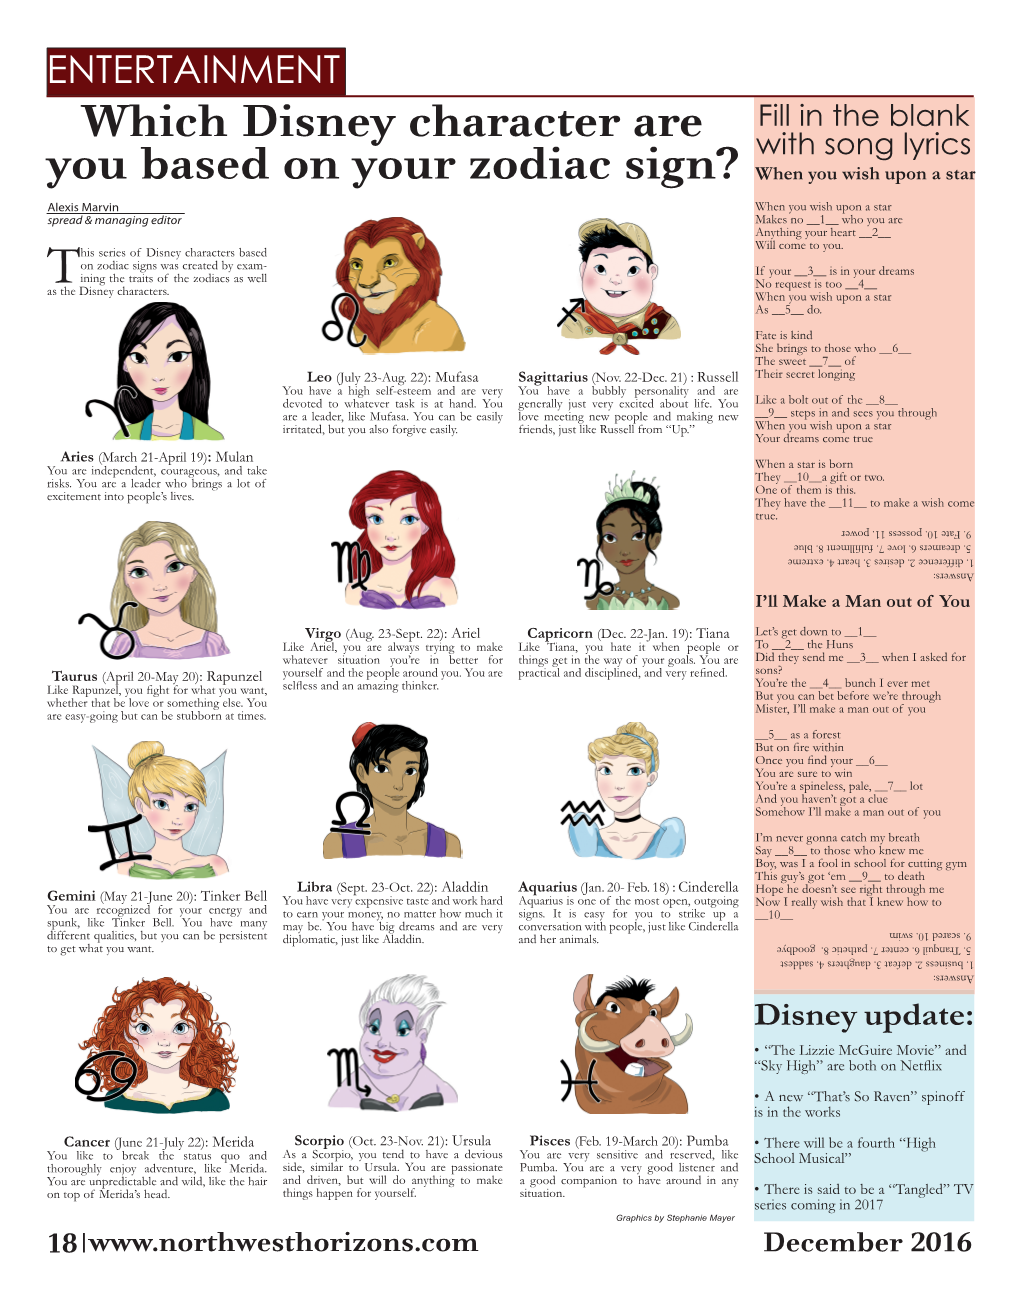 Which Disney Character Are You Based on Your Zodiac Sign?